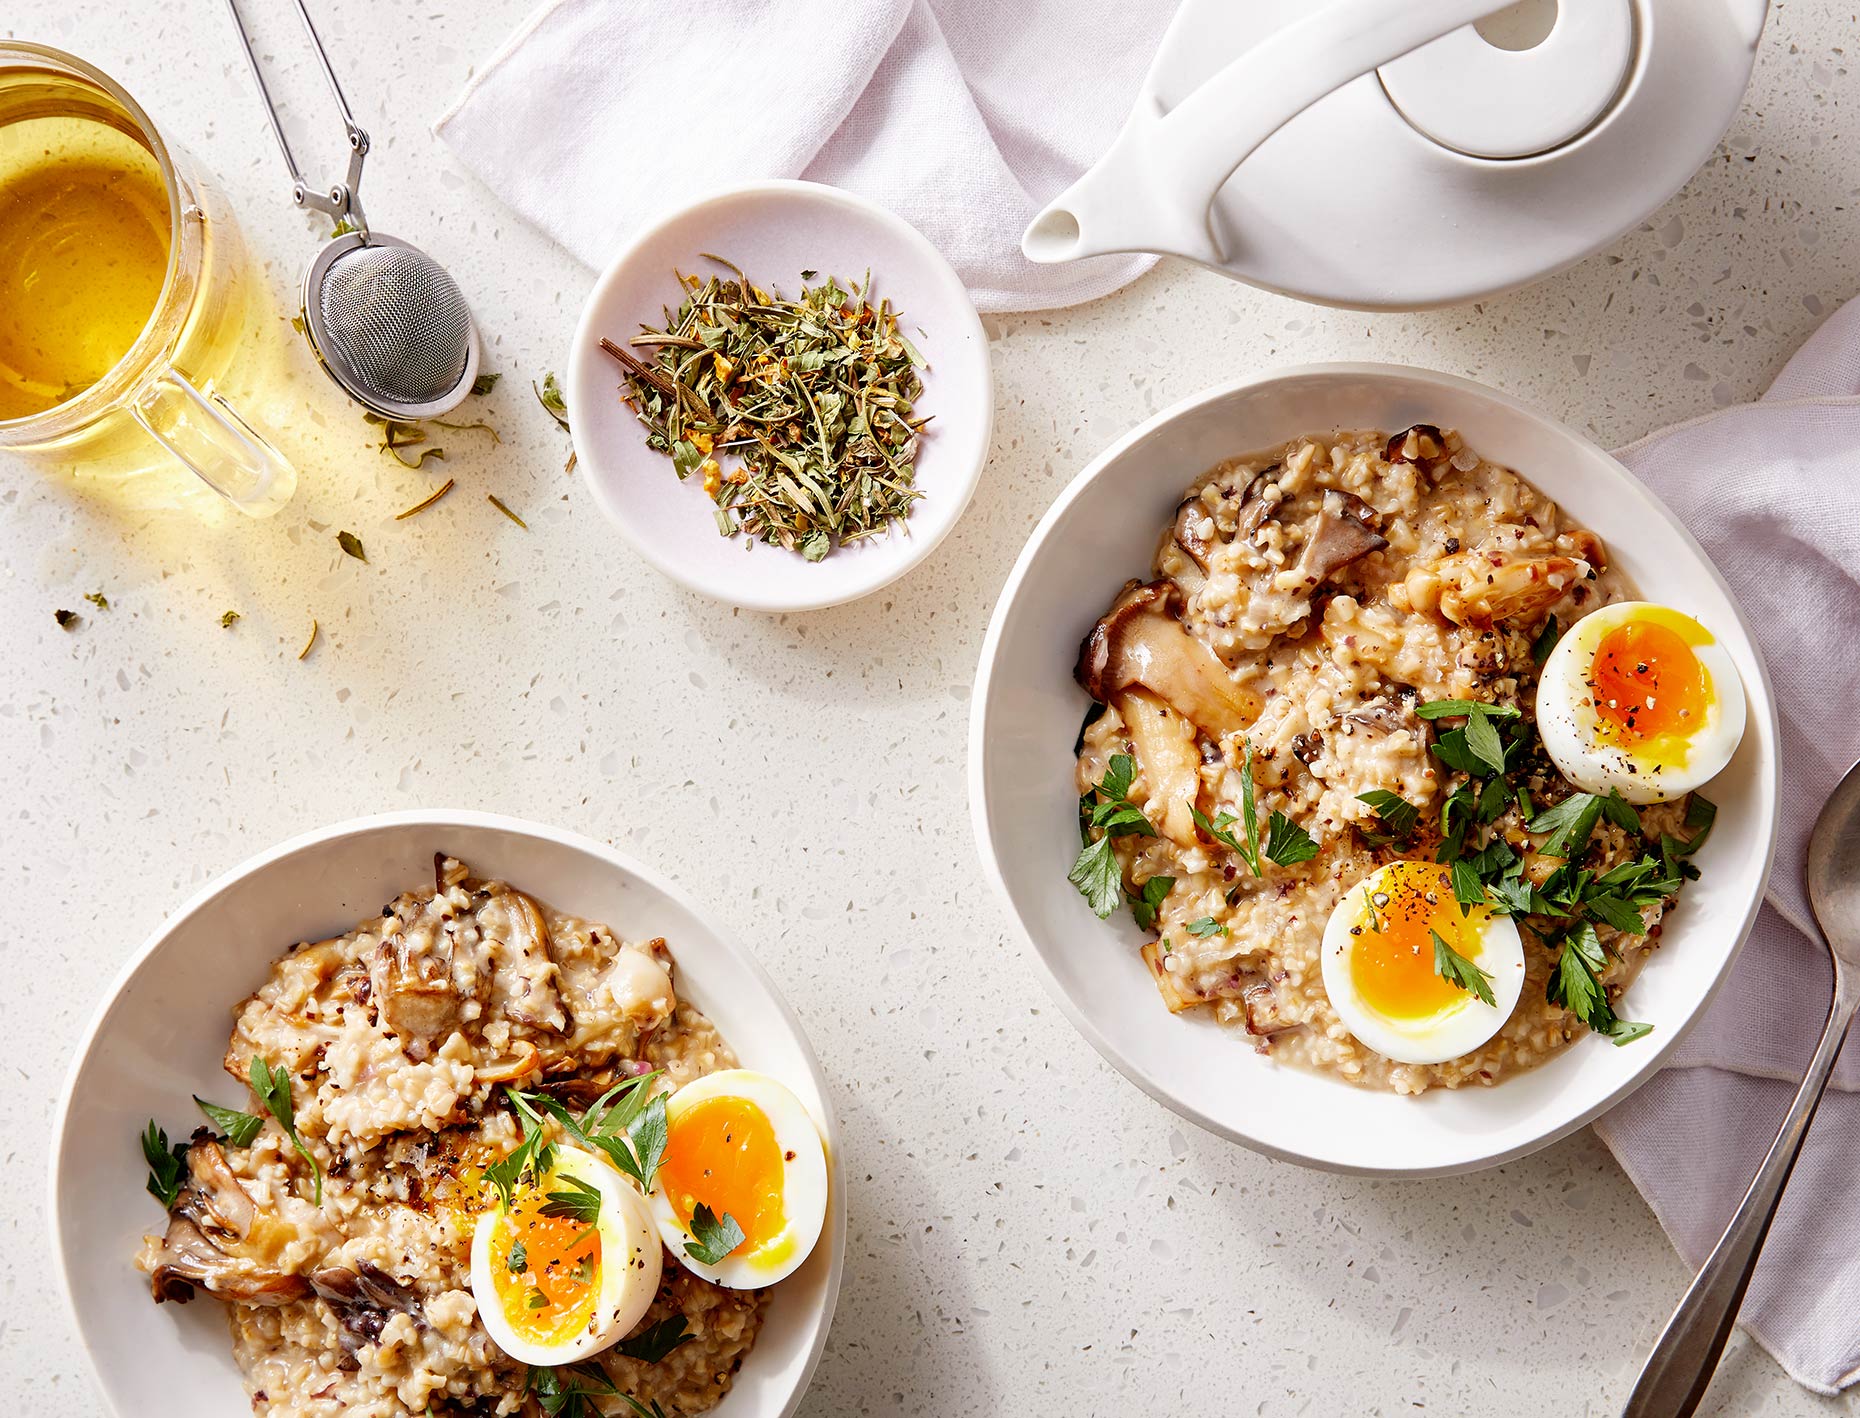 Kristin Teig Photography | Savory Oats with Soft-Boiled Egg for Goop